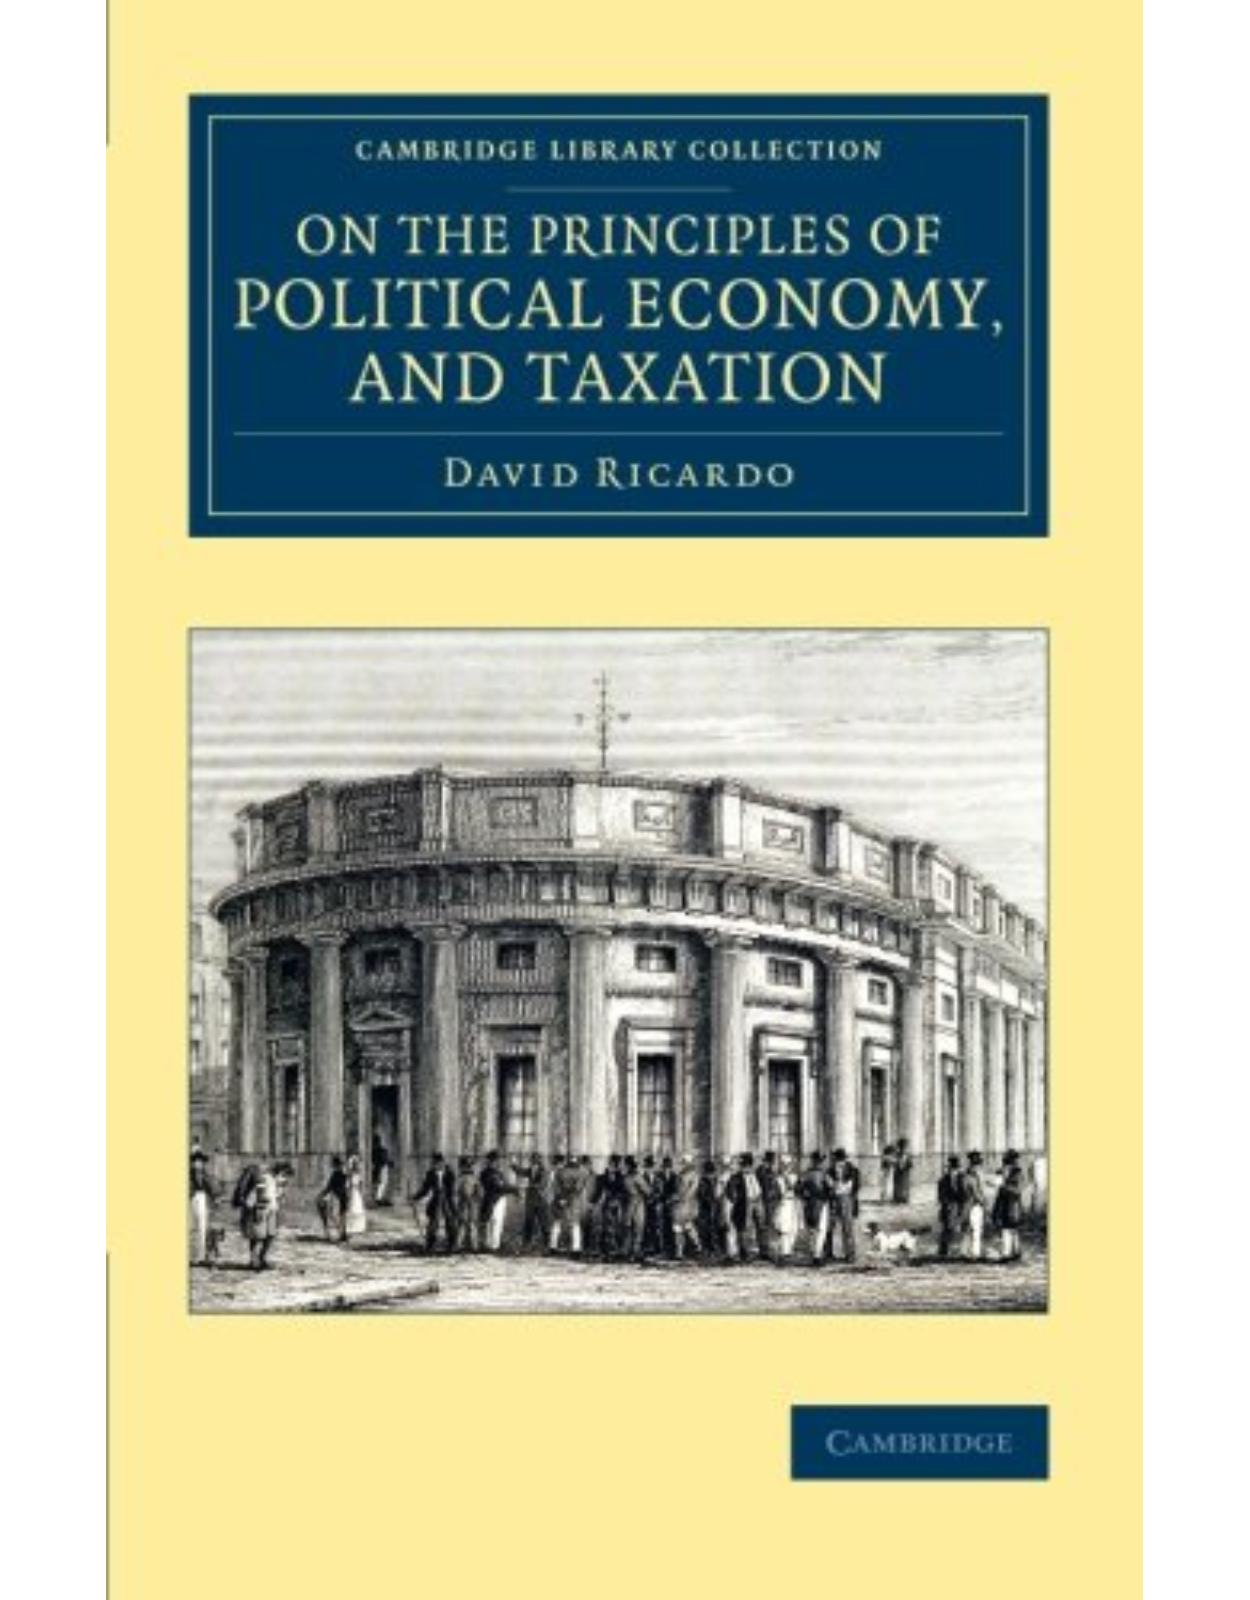 On the Principles of Political Economy, and Taxation (Cambridge Library Collection - British and Irish History, 19th Century)